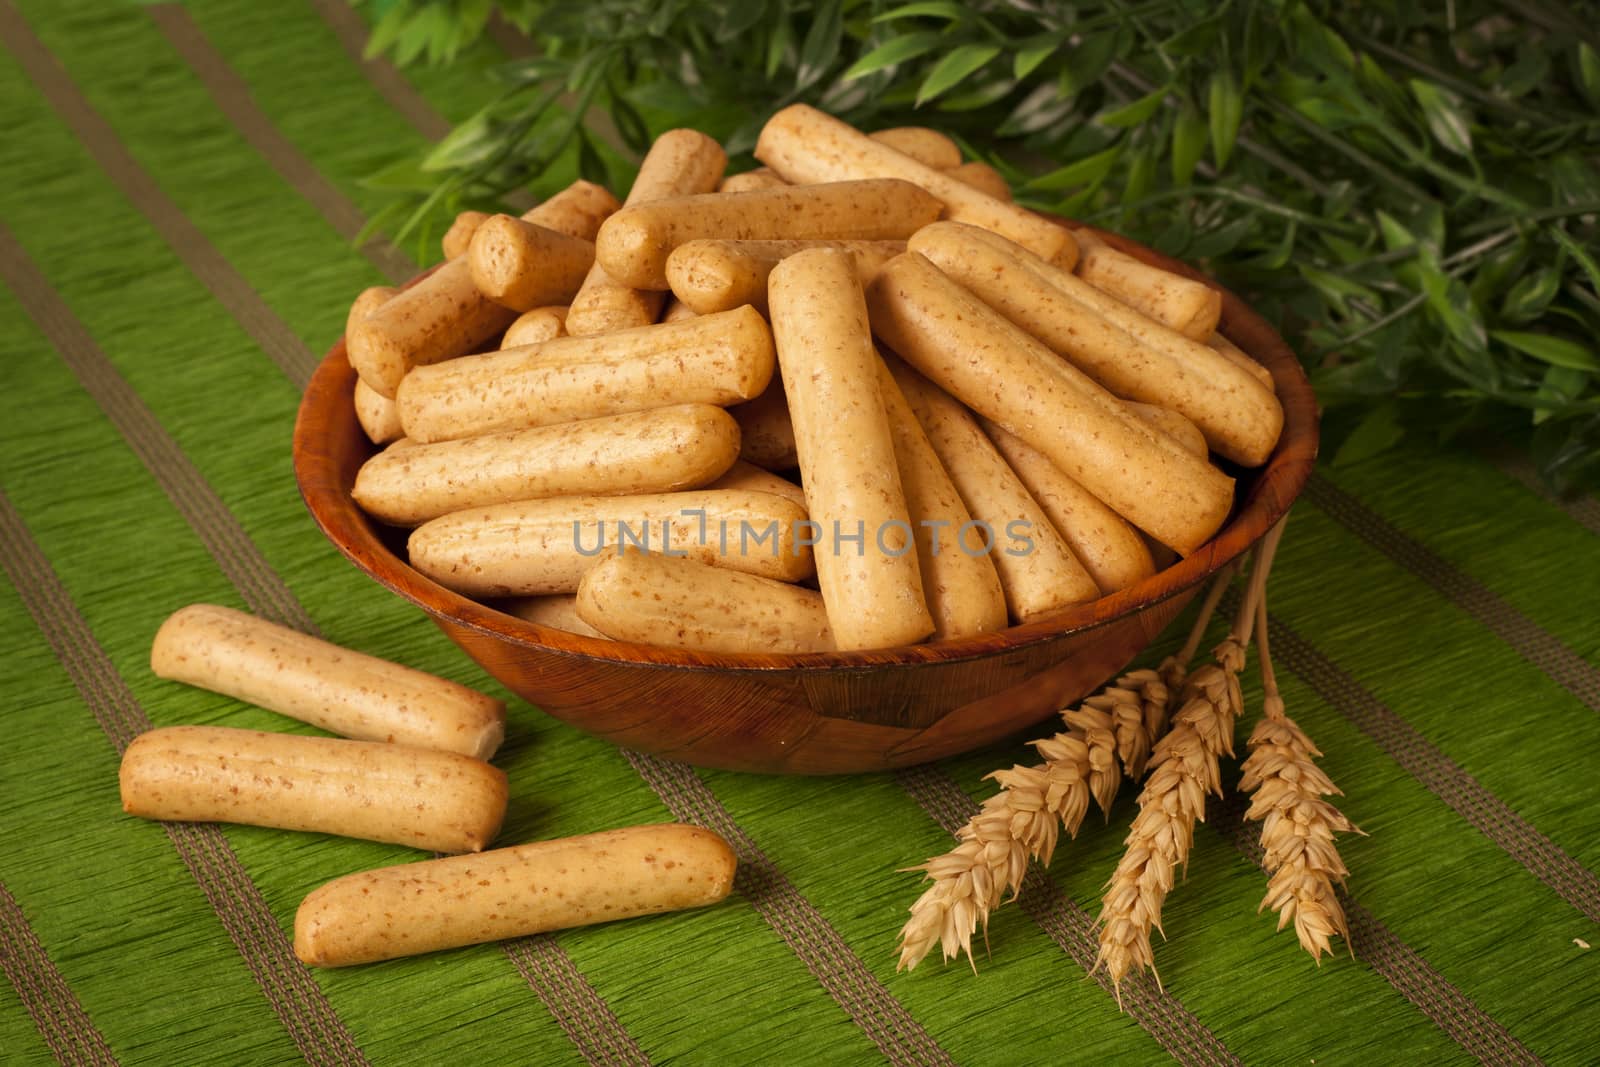 Bread Sticks over green background and decorated with wheat spikes